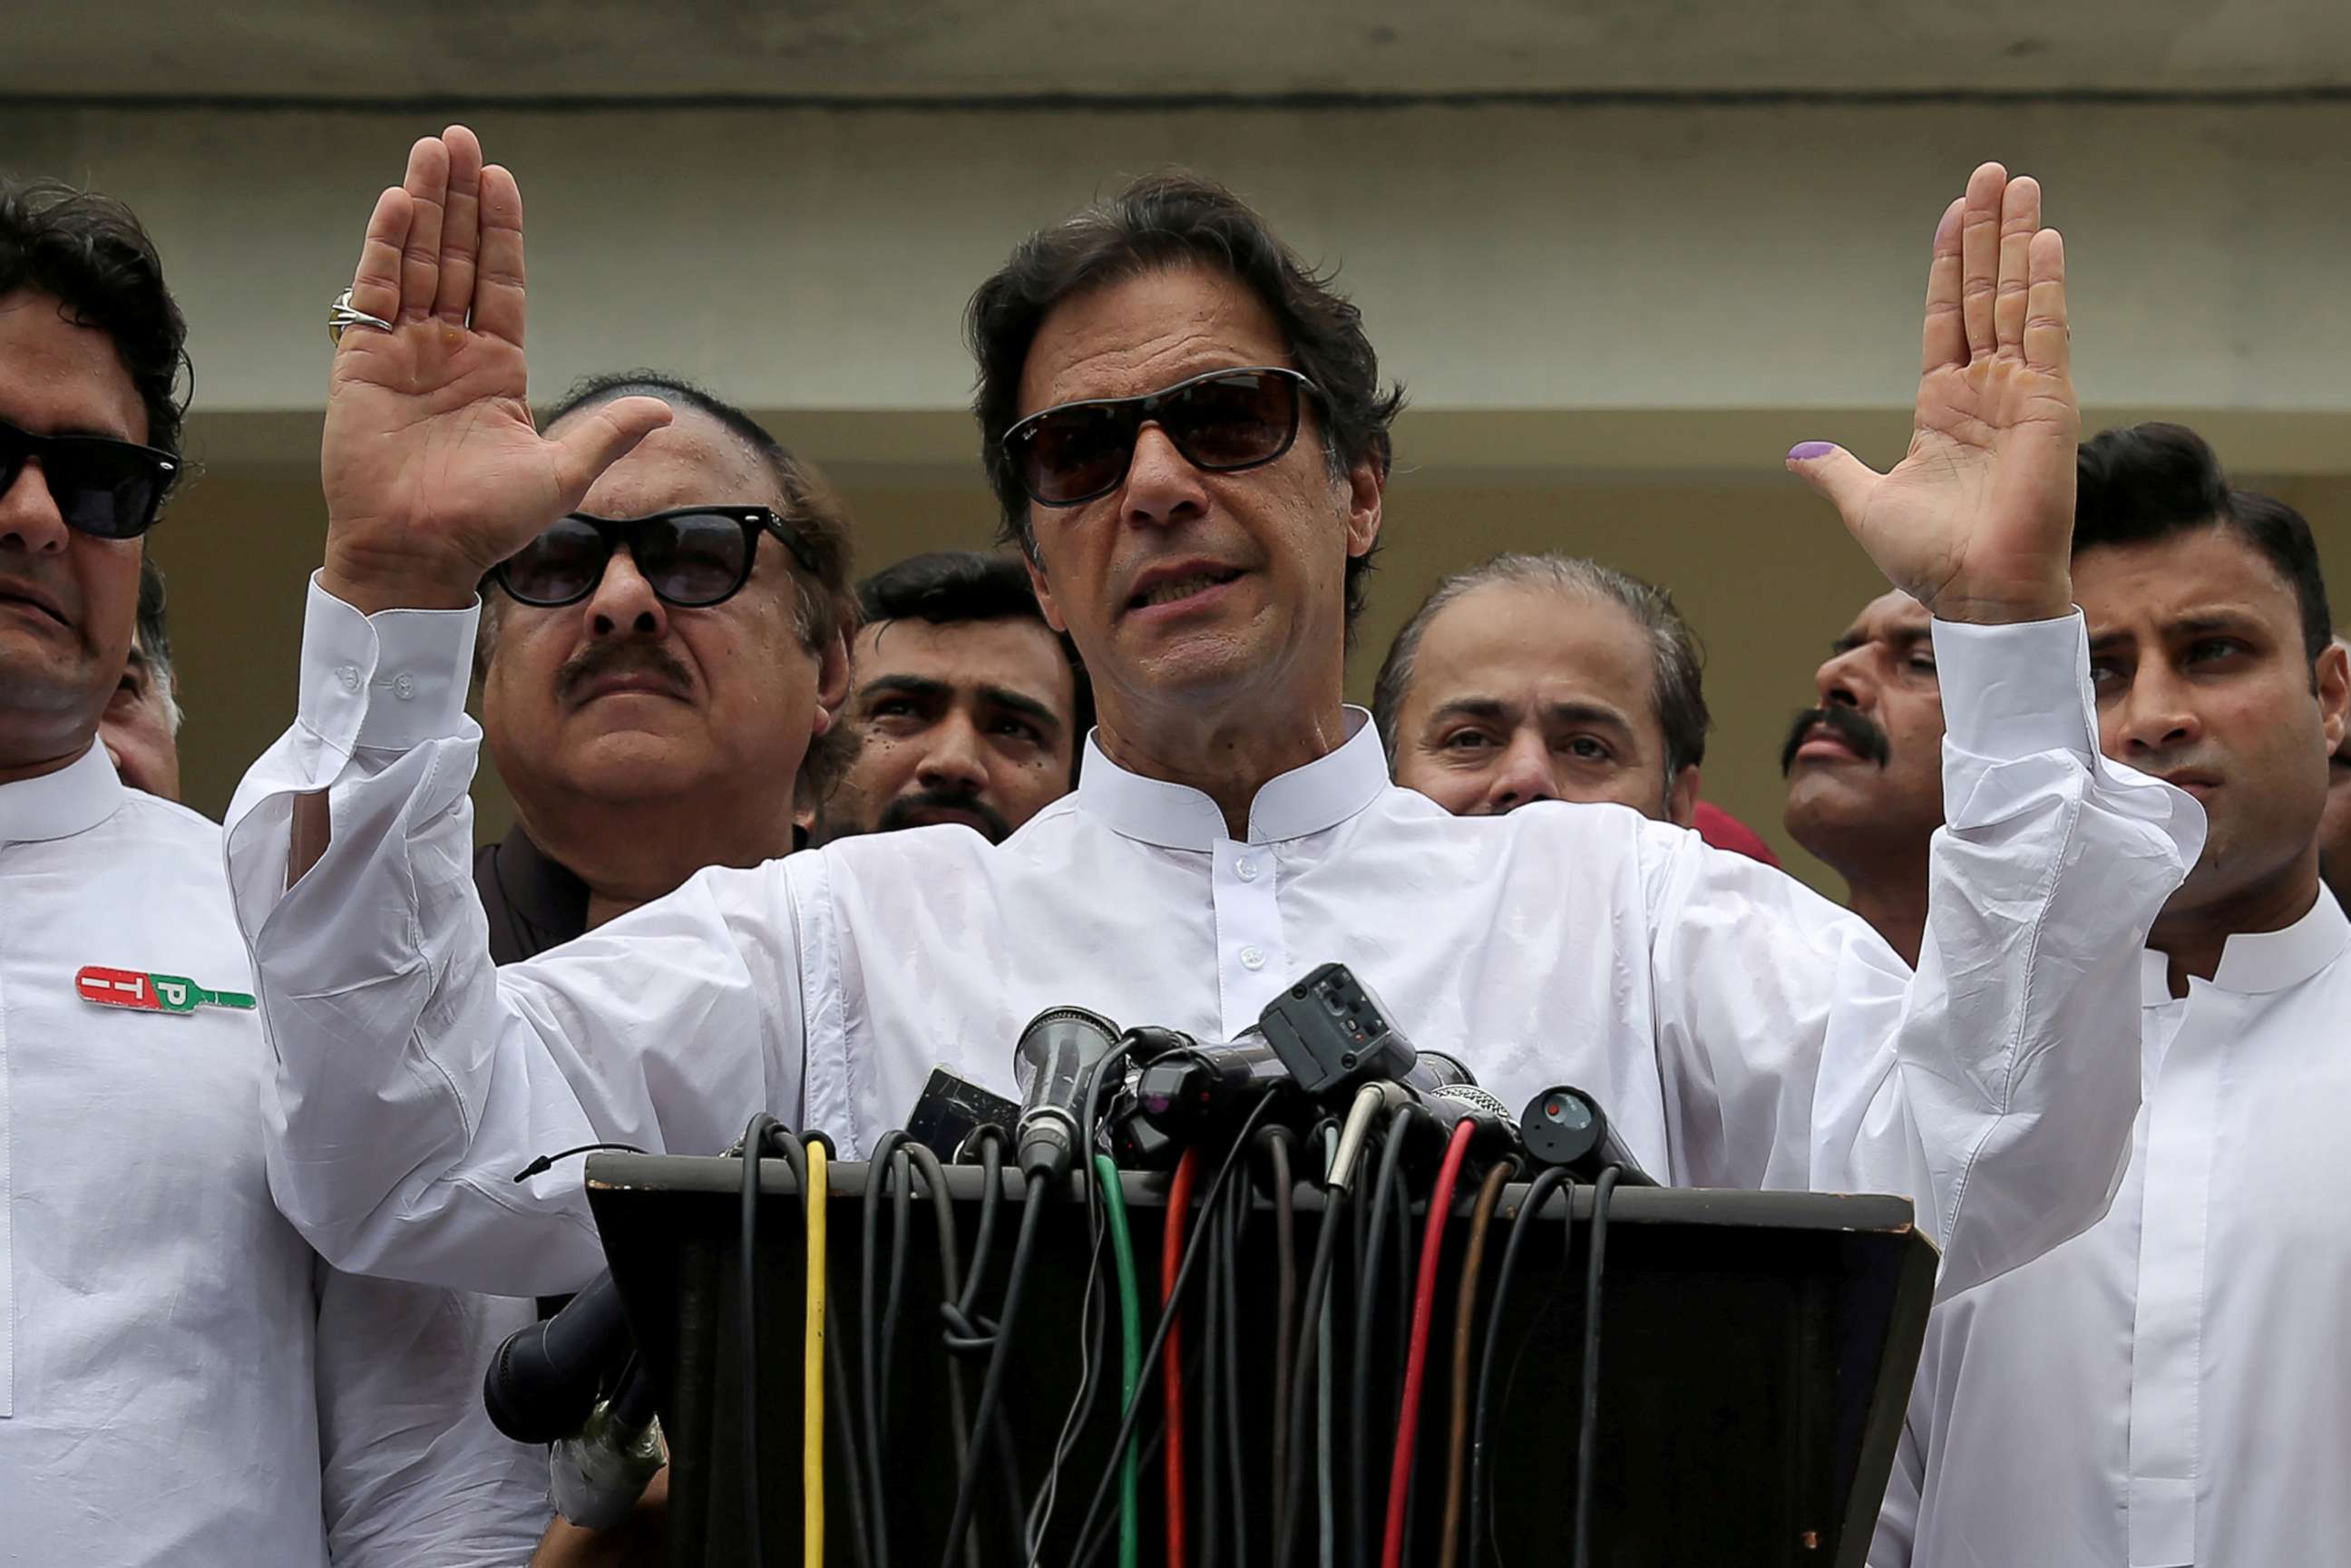 PHOTO: Imran Khan, chairman of Pakistan Tehreek-e-Insaf (PTI), speaks after voting in the general election in Islamabad, July 25, 2018.